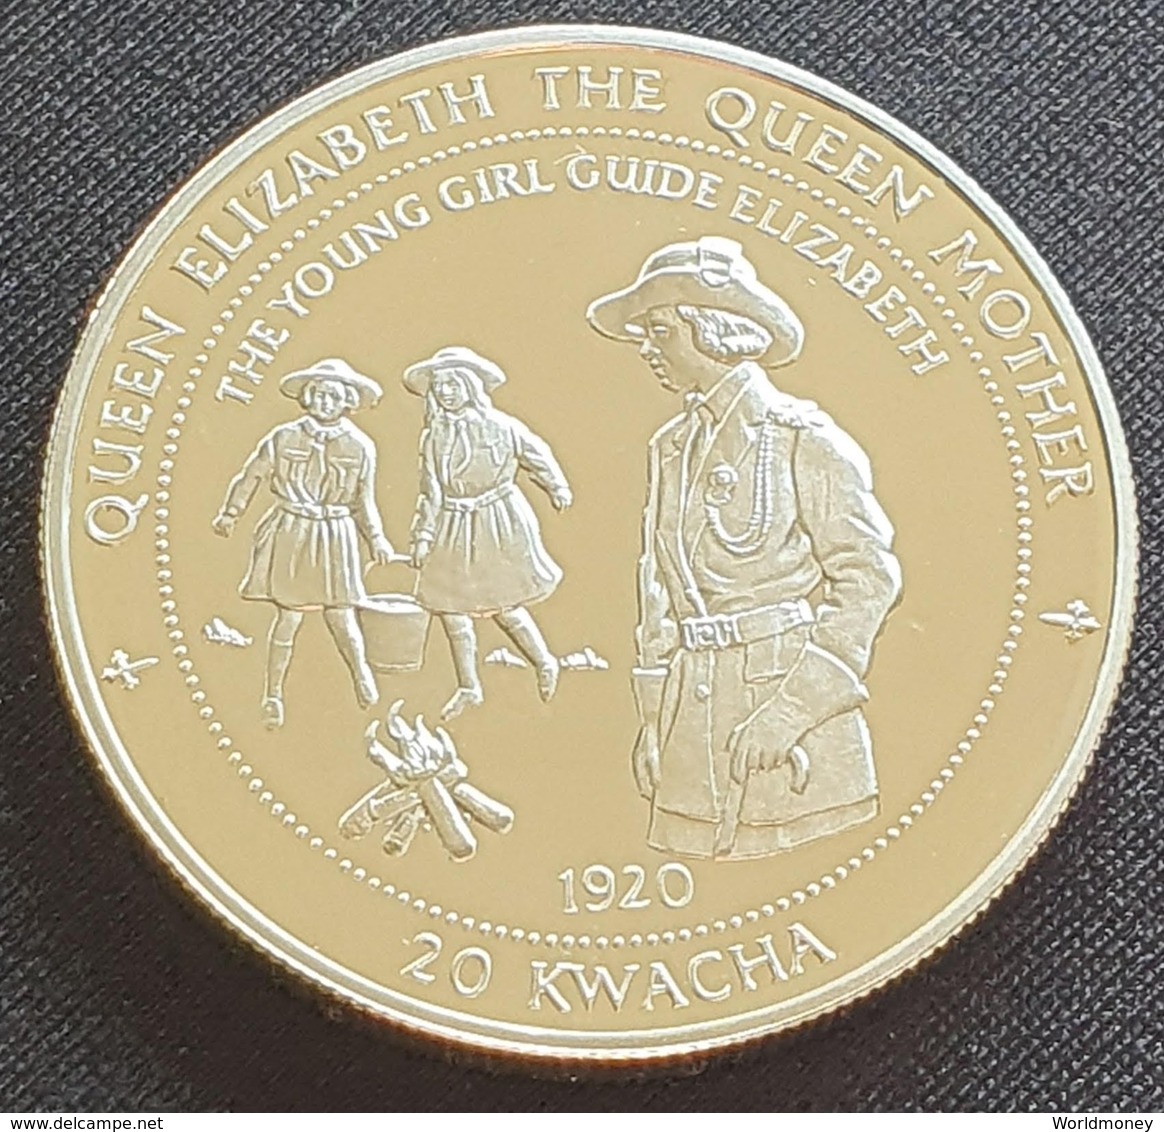 Malawi 20 Kwacha 1997 (PROOF)  -The Queen Mother In The Girl Guides 1920 - Malawi